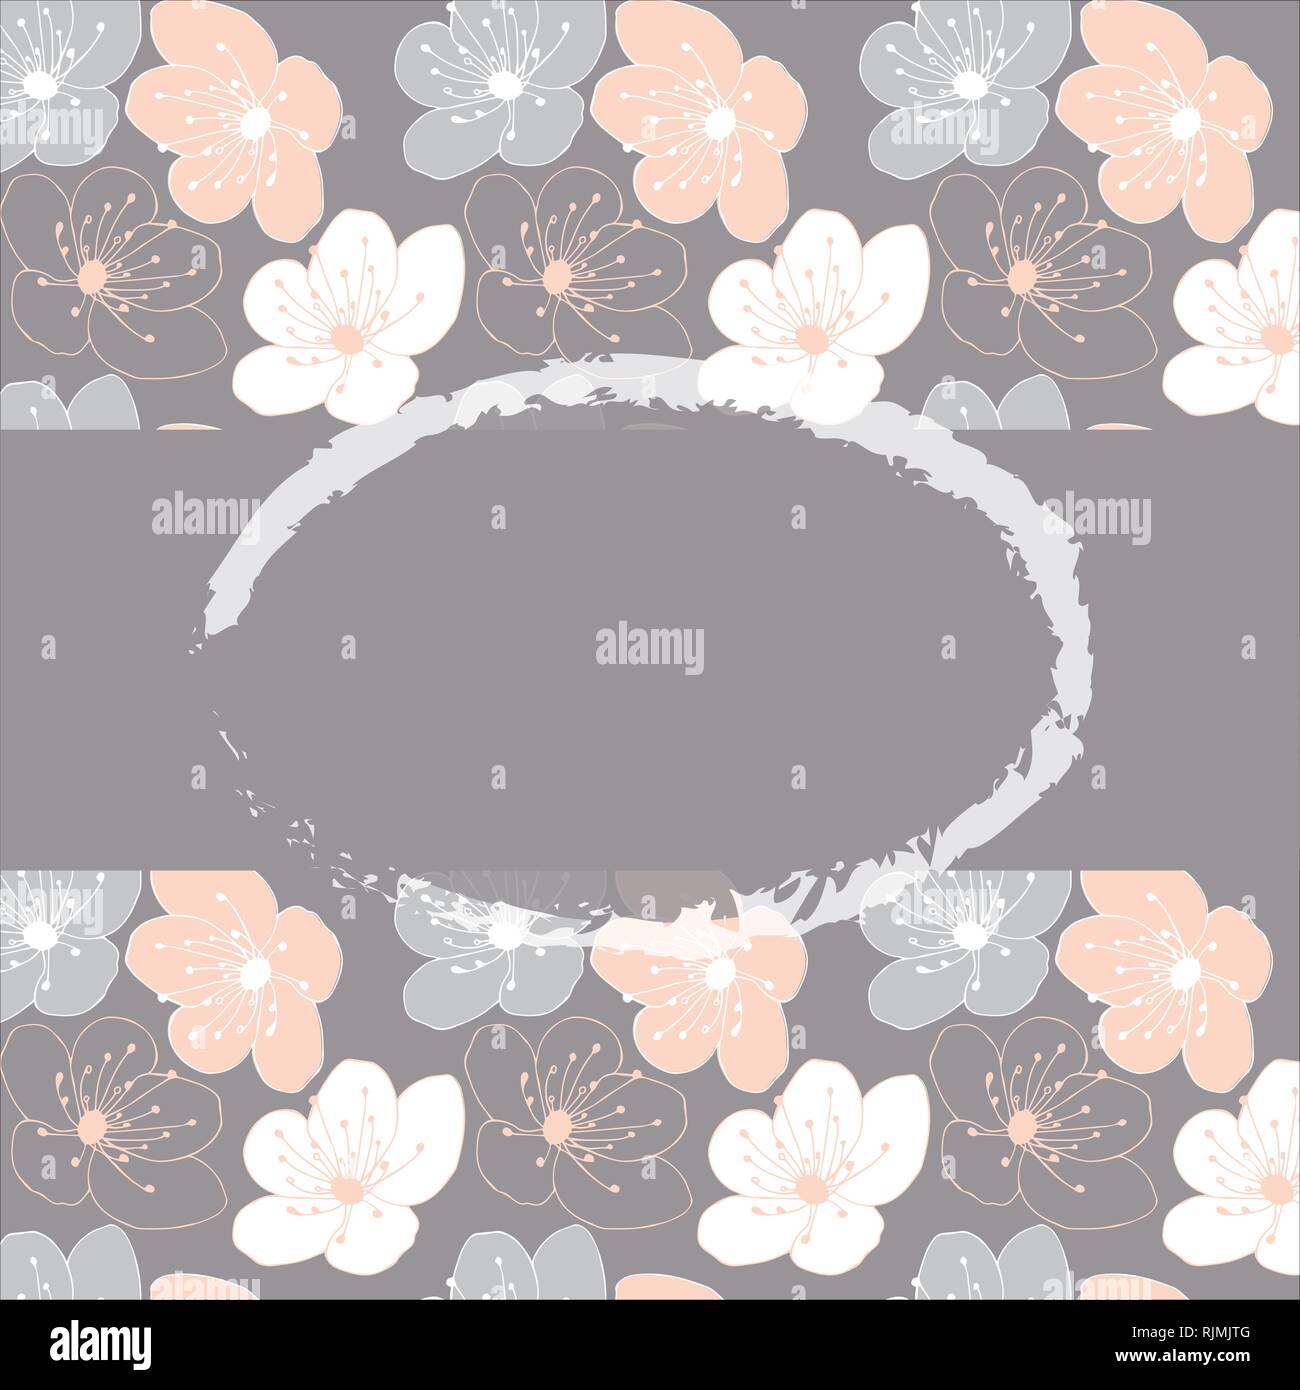 Cherry blossom flower vector pattern card template in a gray, pink and white color palette with a gray stripe and space for text Stock Vector